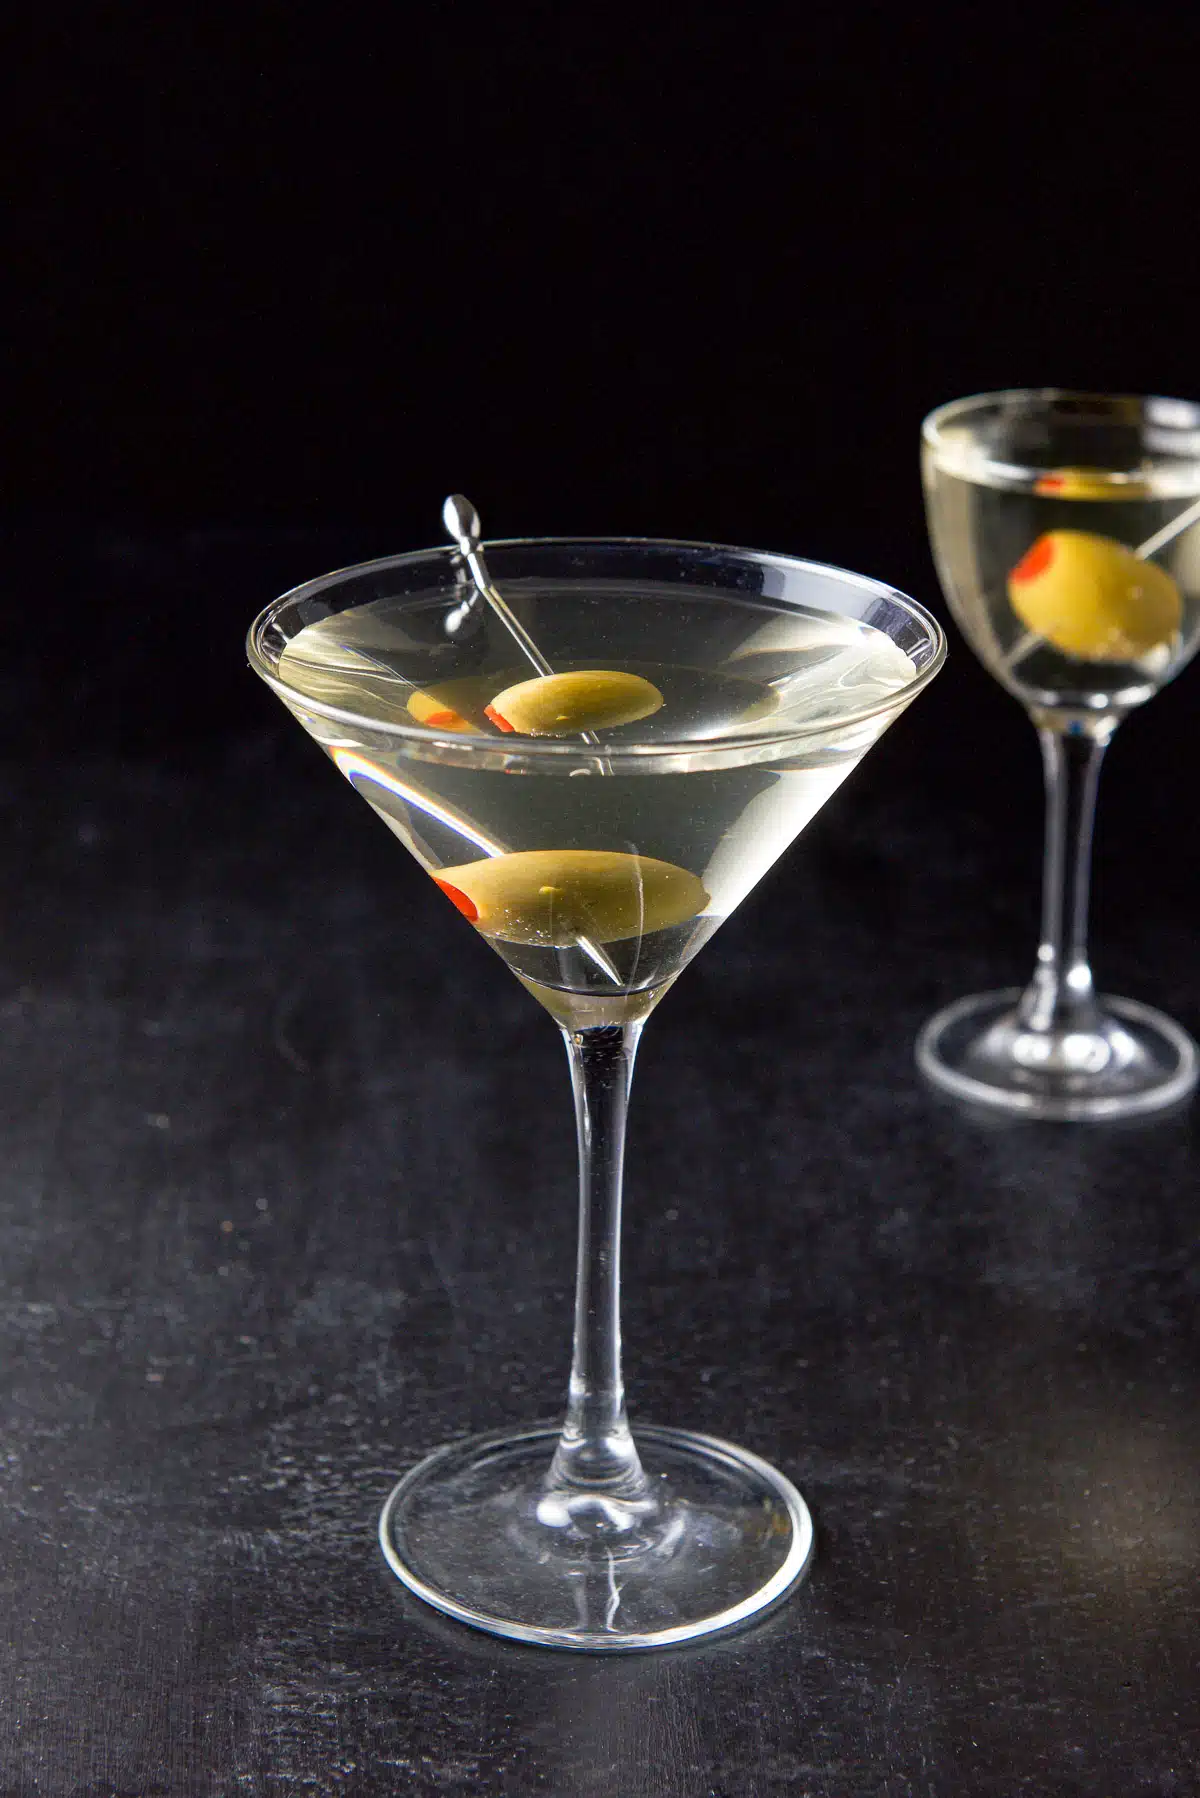 Two martini glasses filled with the martini with olives on picks as garnish